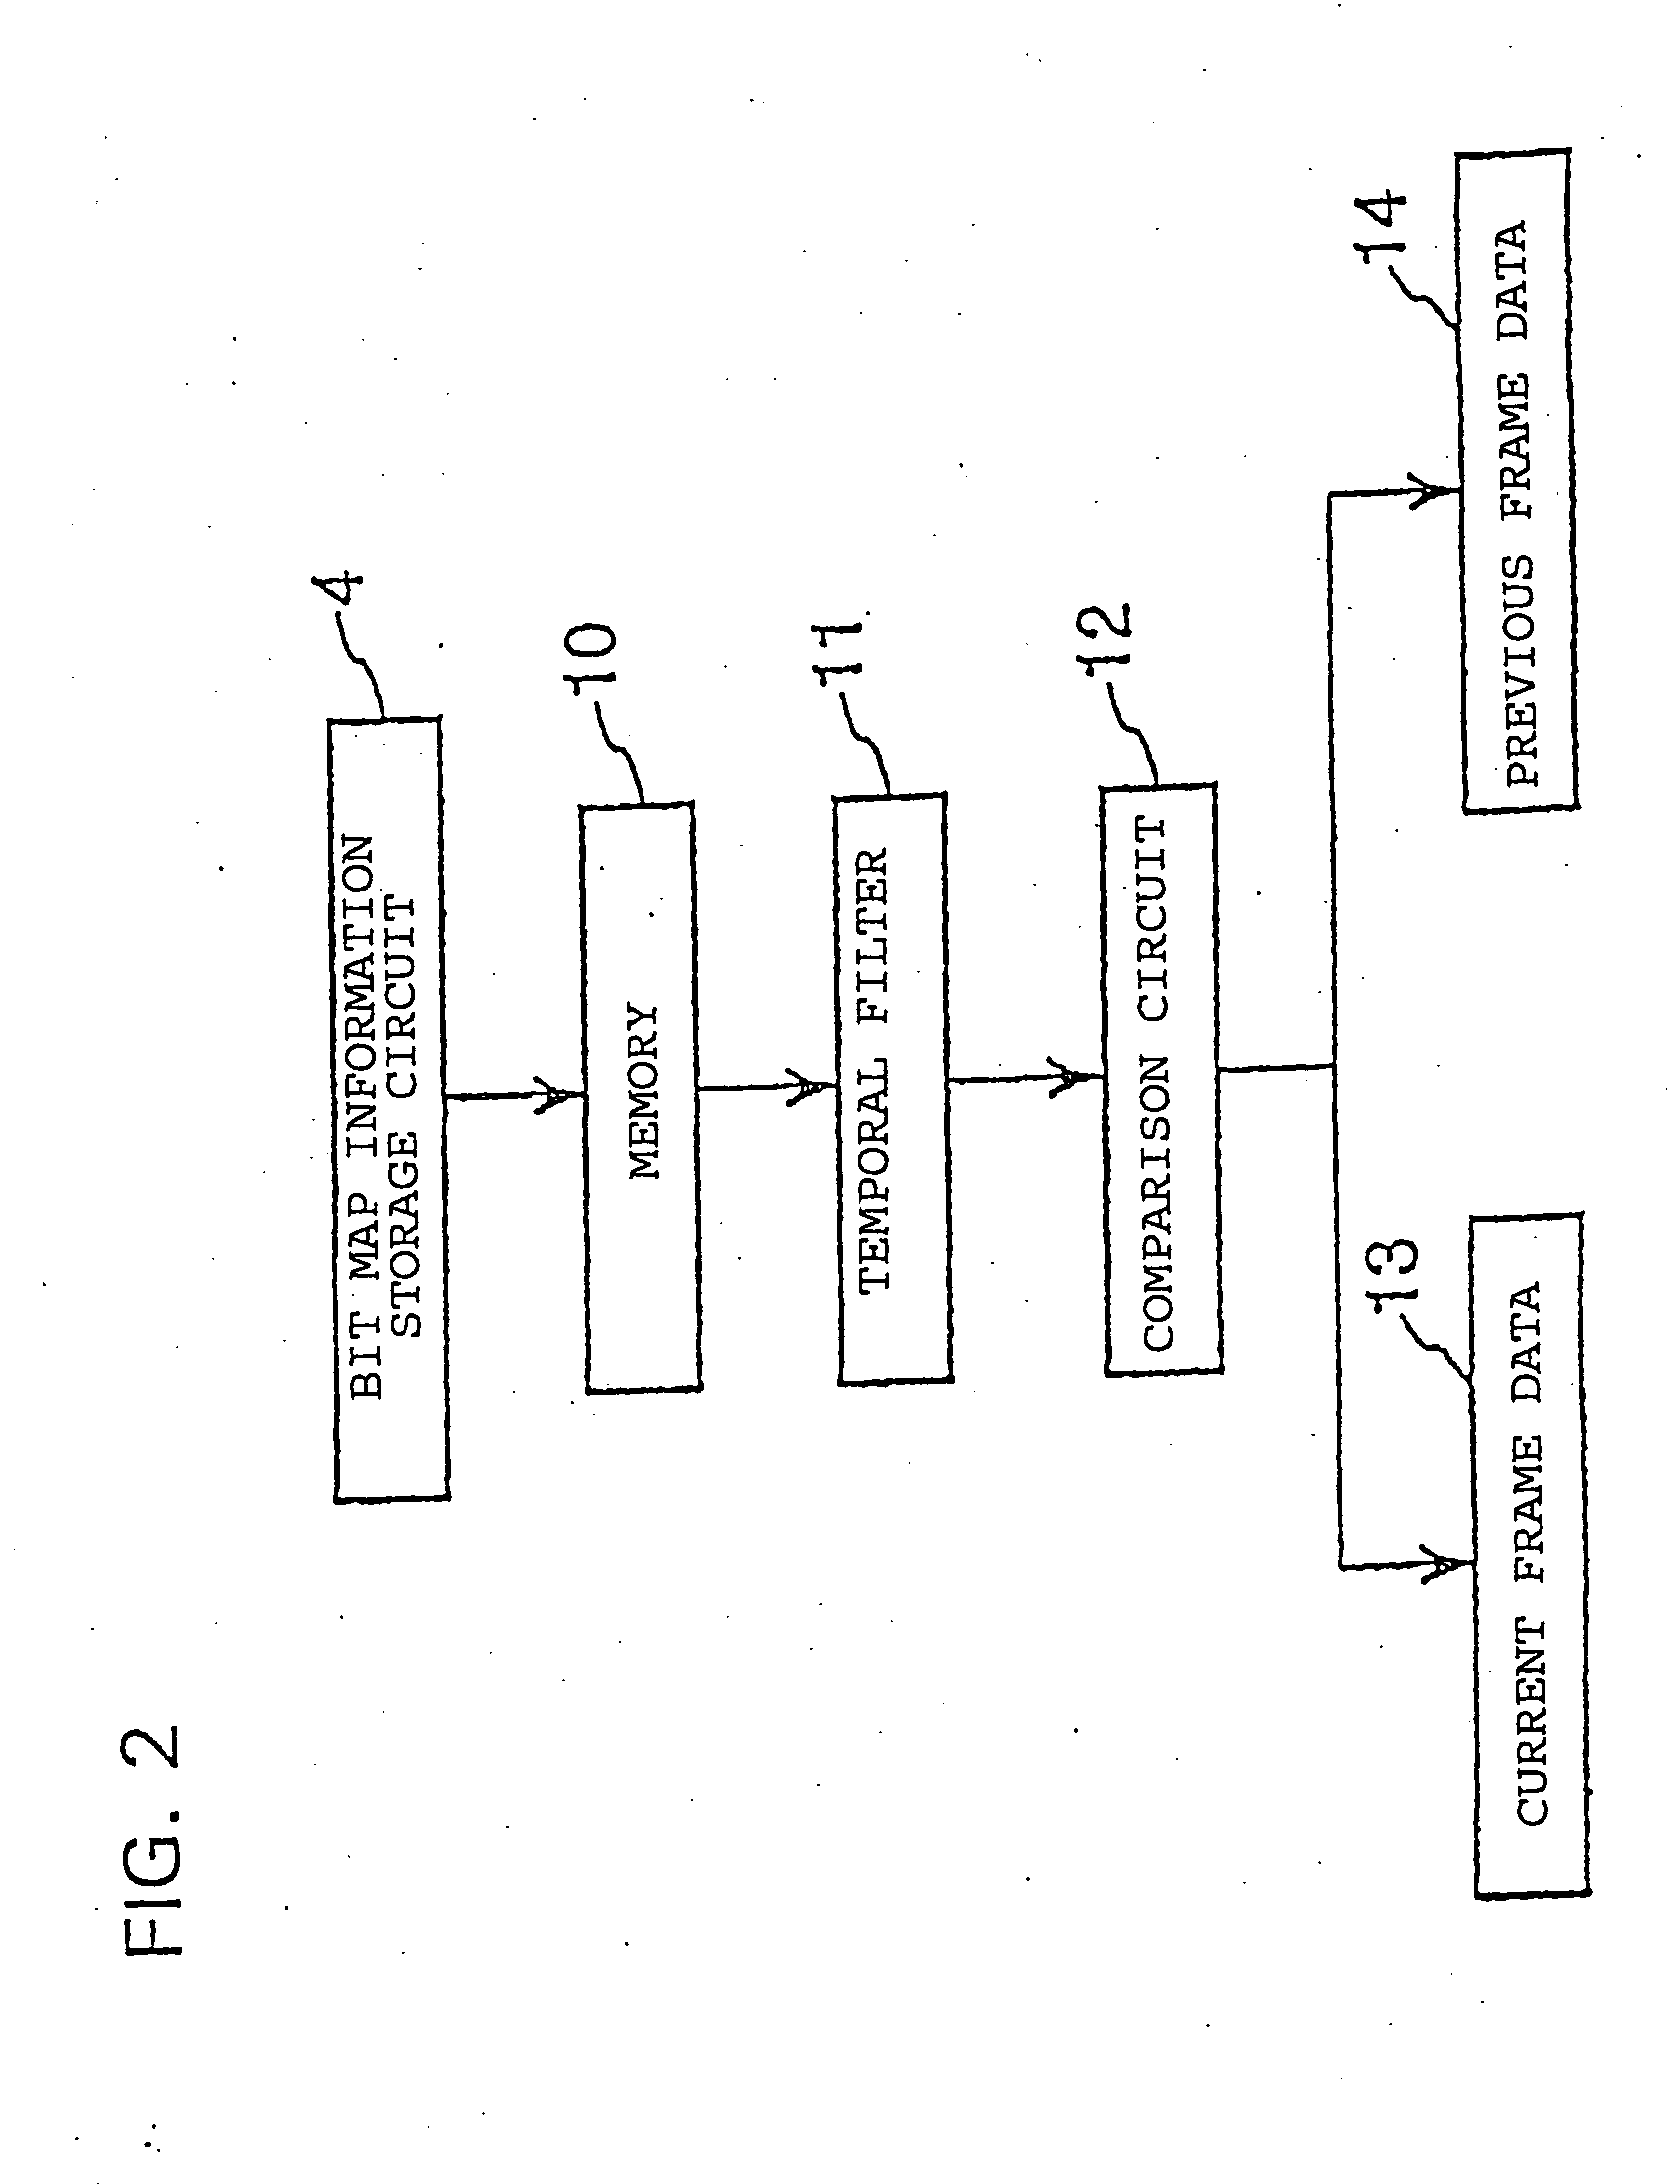 Method and system for compressing motion image information